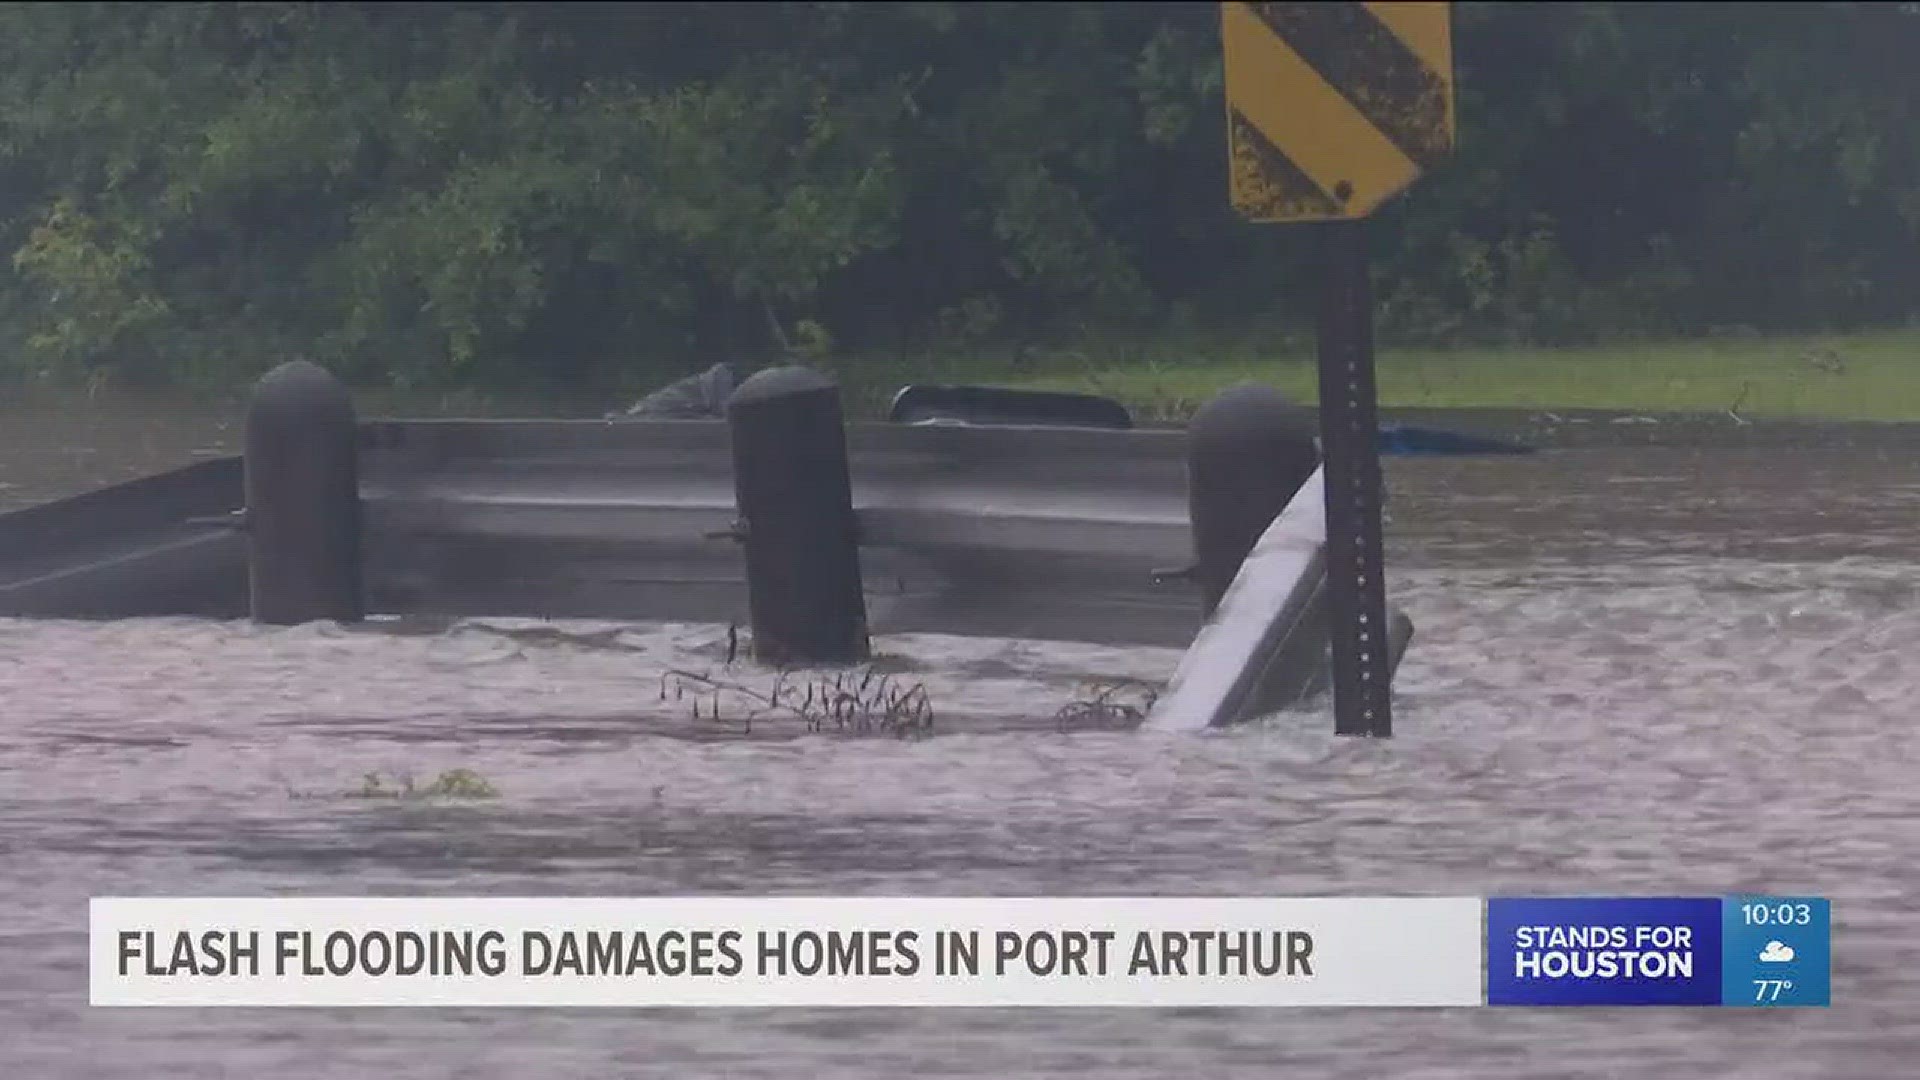 KHOU 11 Top Headlines at 10 p.m. include flash flooding damaging homes in Port Arthur, charities helps families seeking asylum and dozens of community leaders condemn detention center plans in downtown Houston.